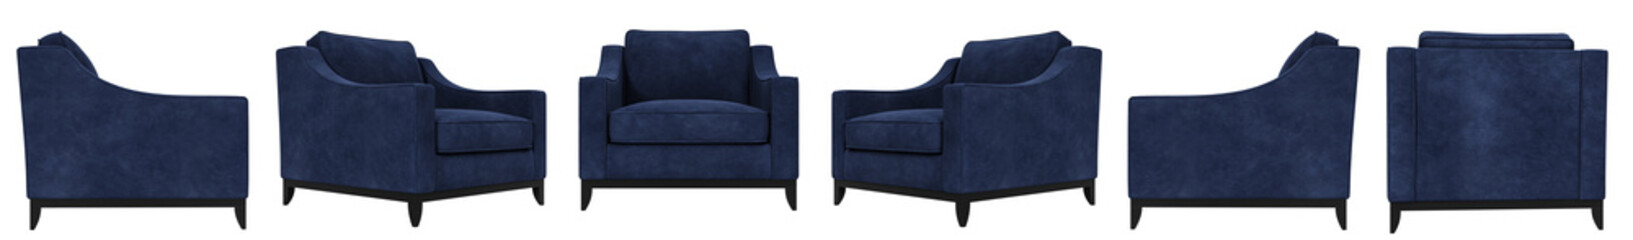 Navy blue velvet  fabric armchair set  with wooden legs isolated on white background. Furniture...